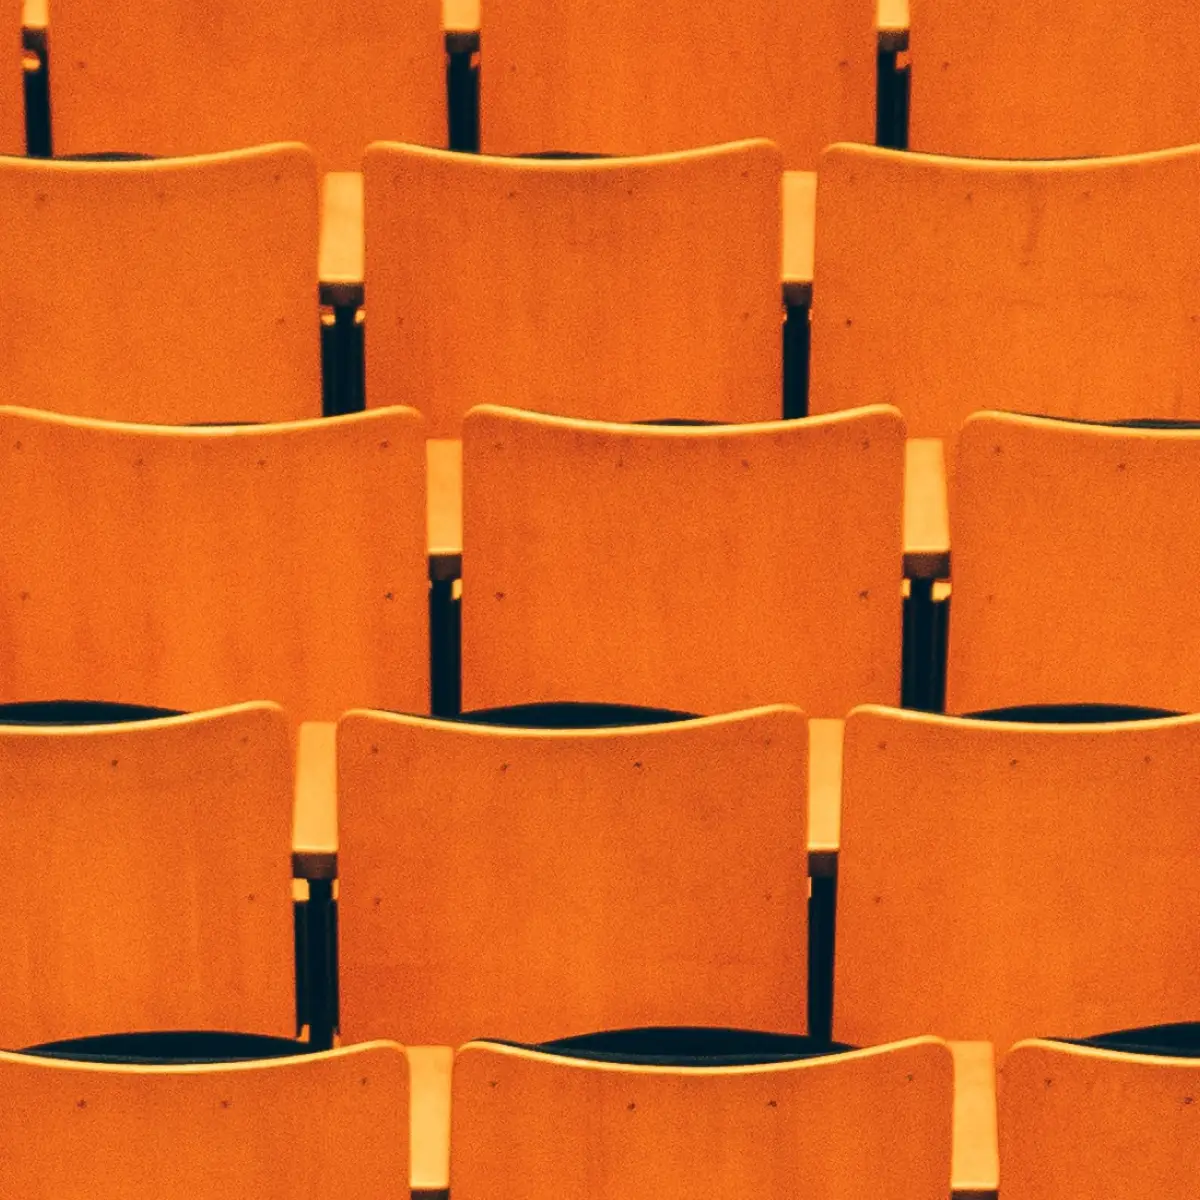 Series of orange chairs lined up in a row to indicate organizational restructuring